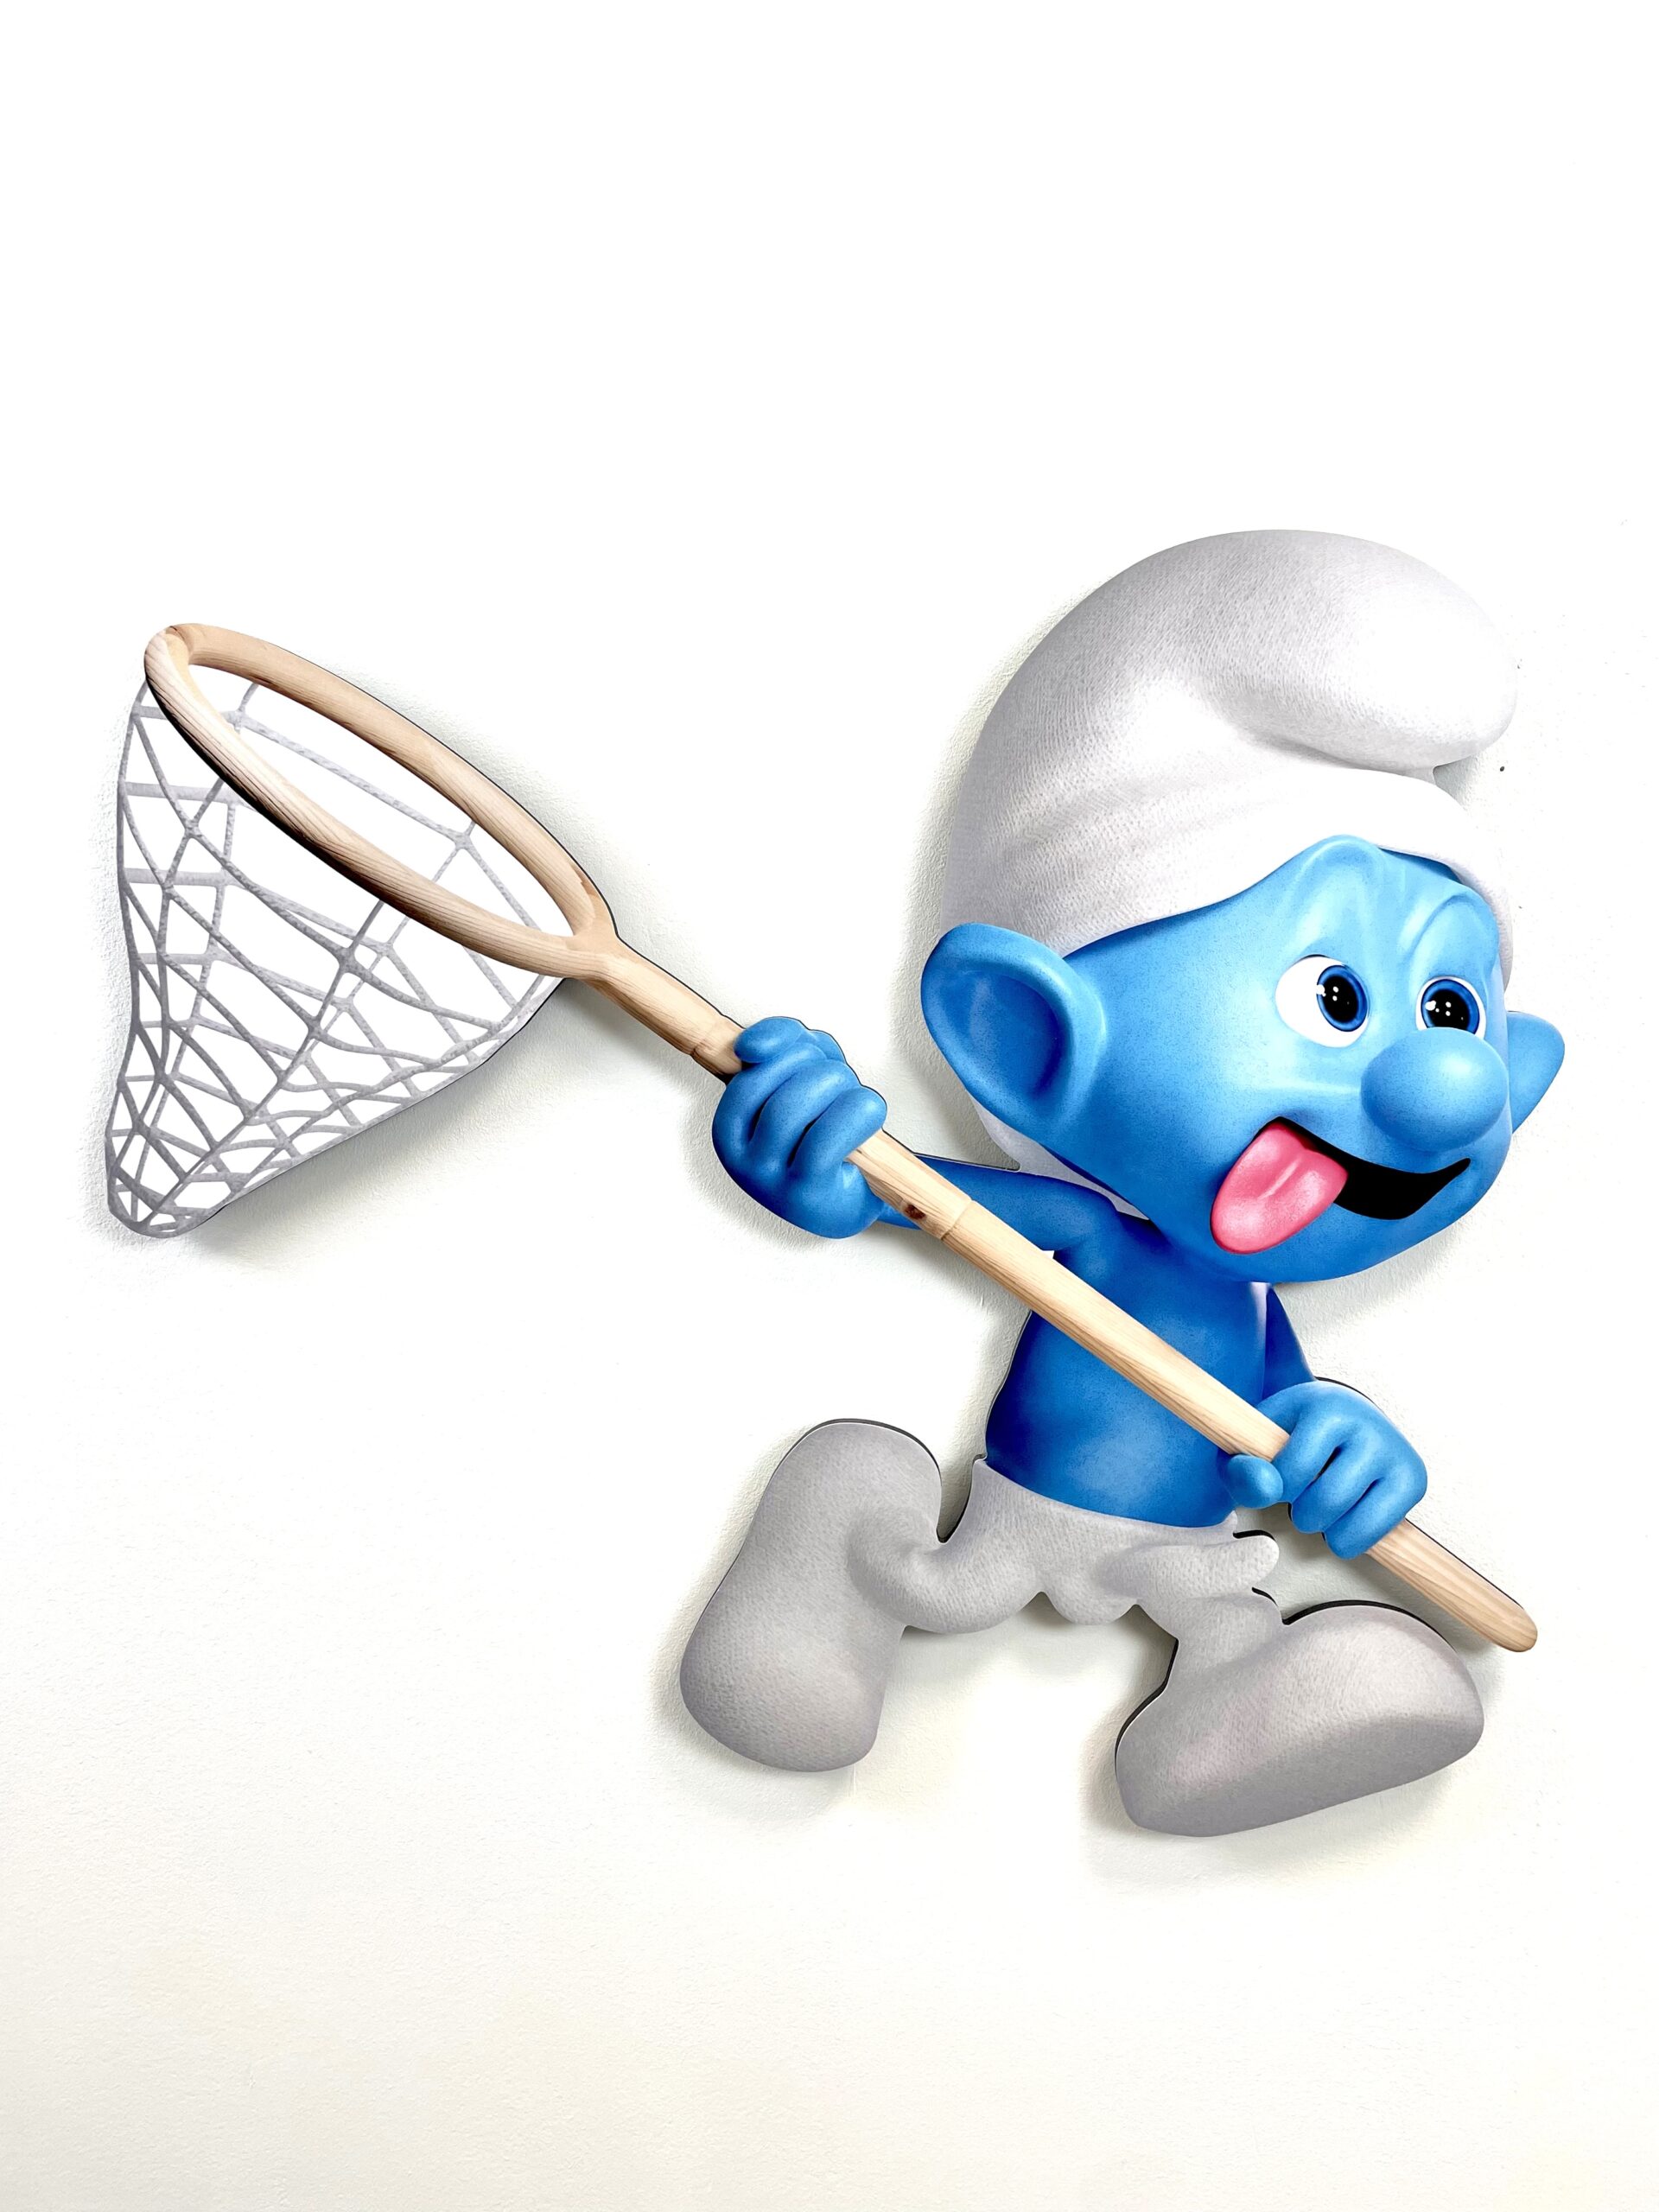 Jules Holland Art - Catch Them If You Can - Smurf